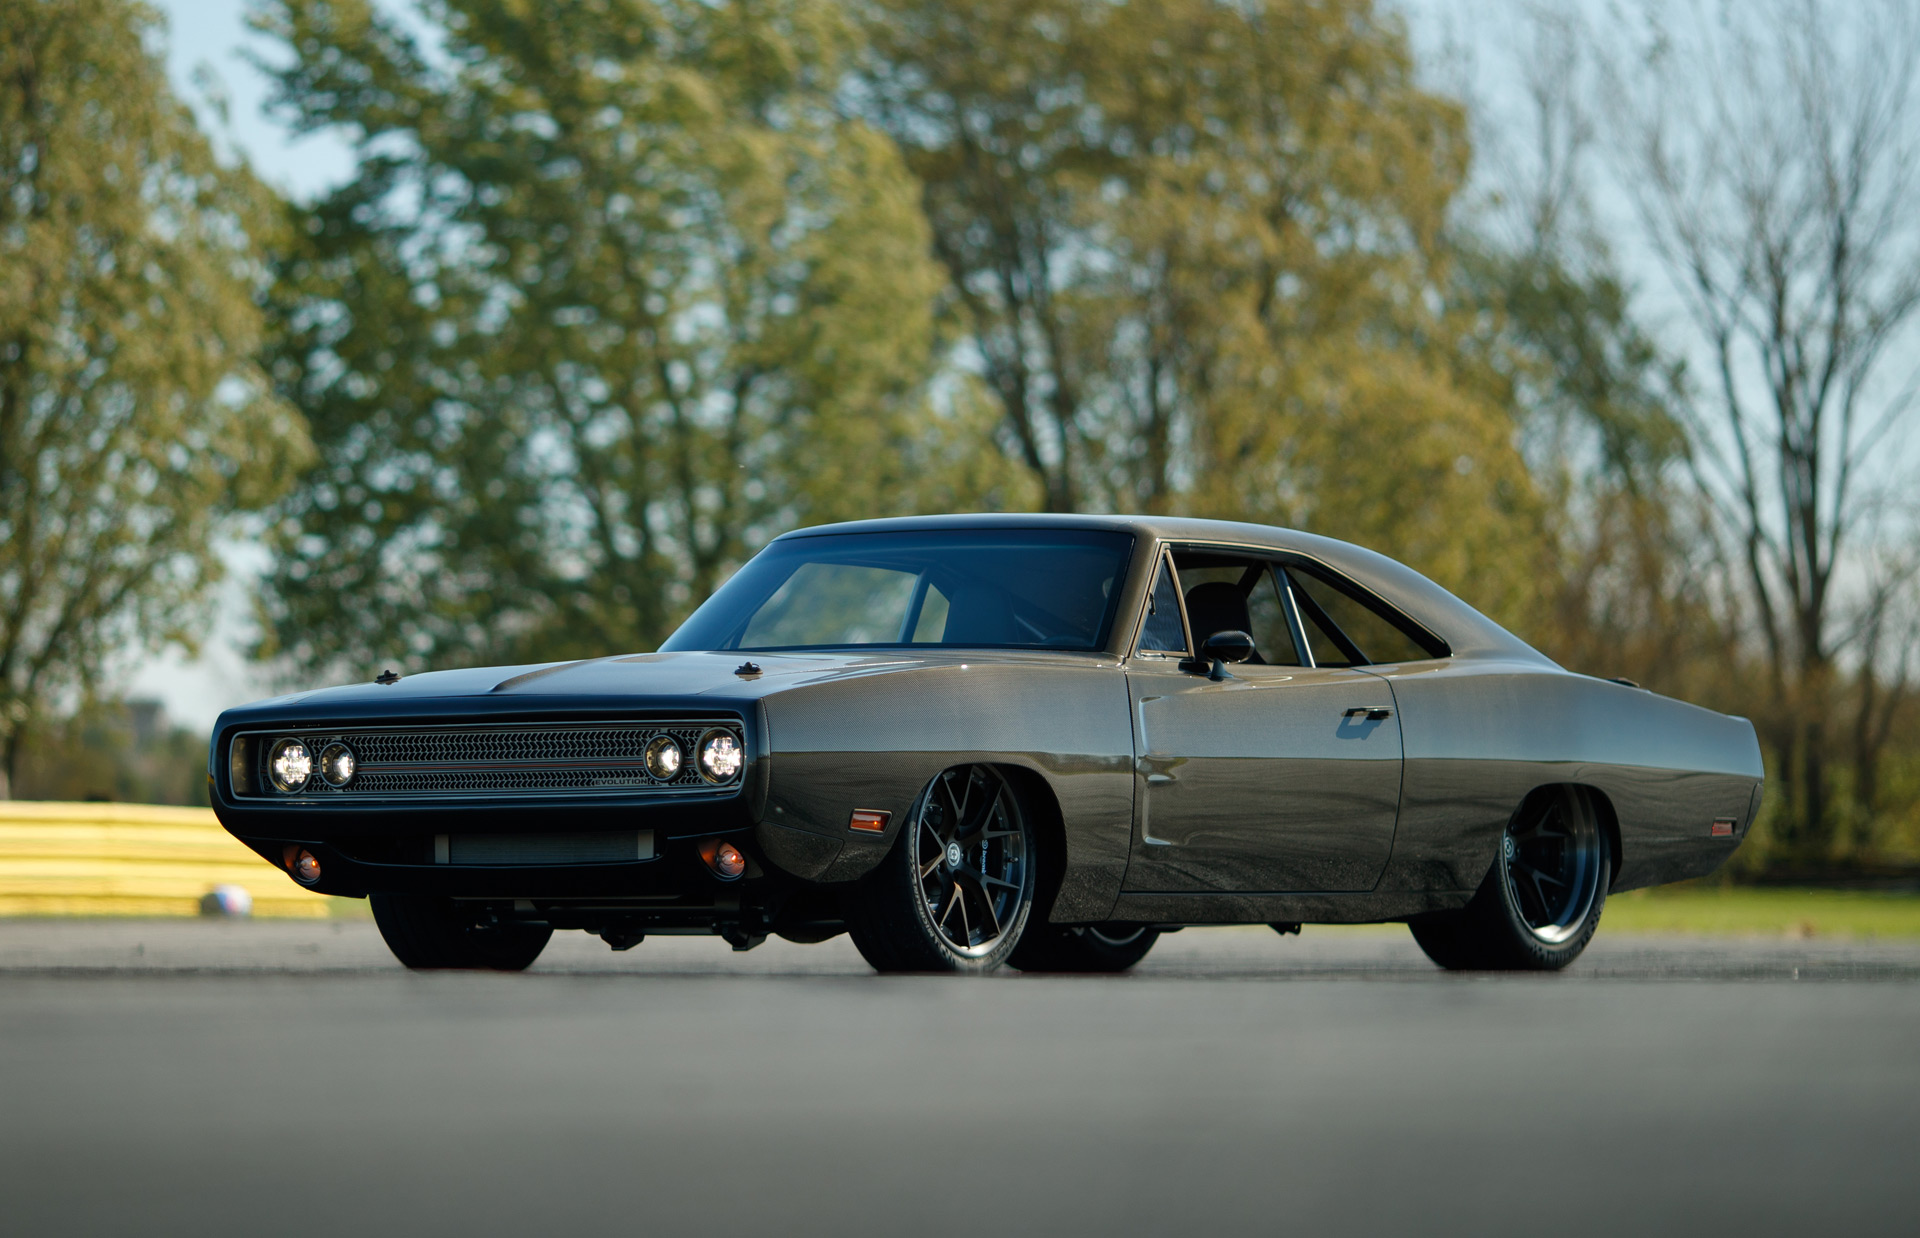 SpeedKore's Demon-powered 1970 Dodge Charger visits Jay Leno's Garage